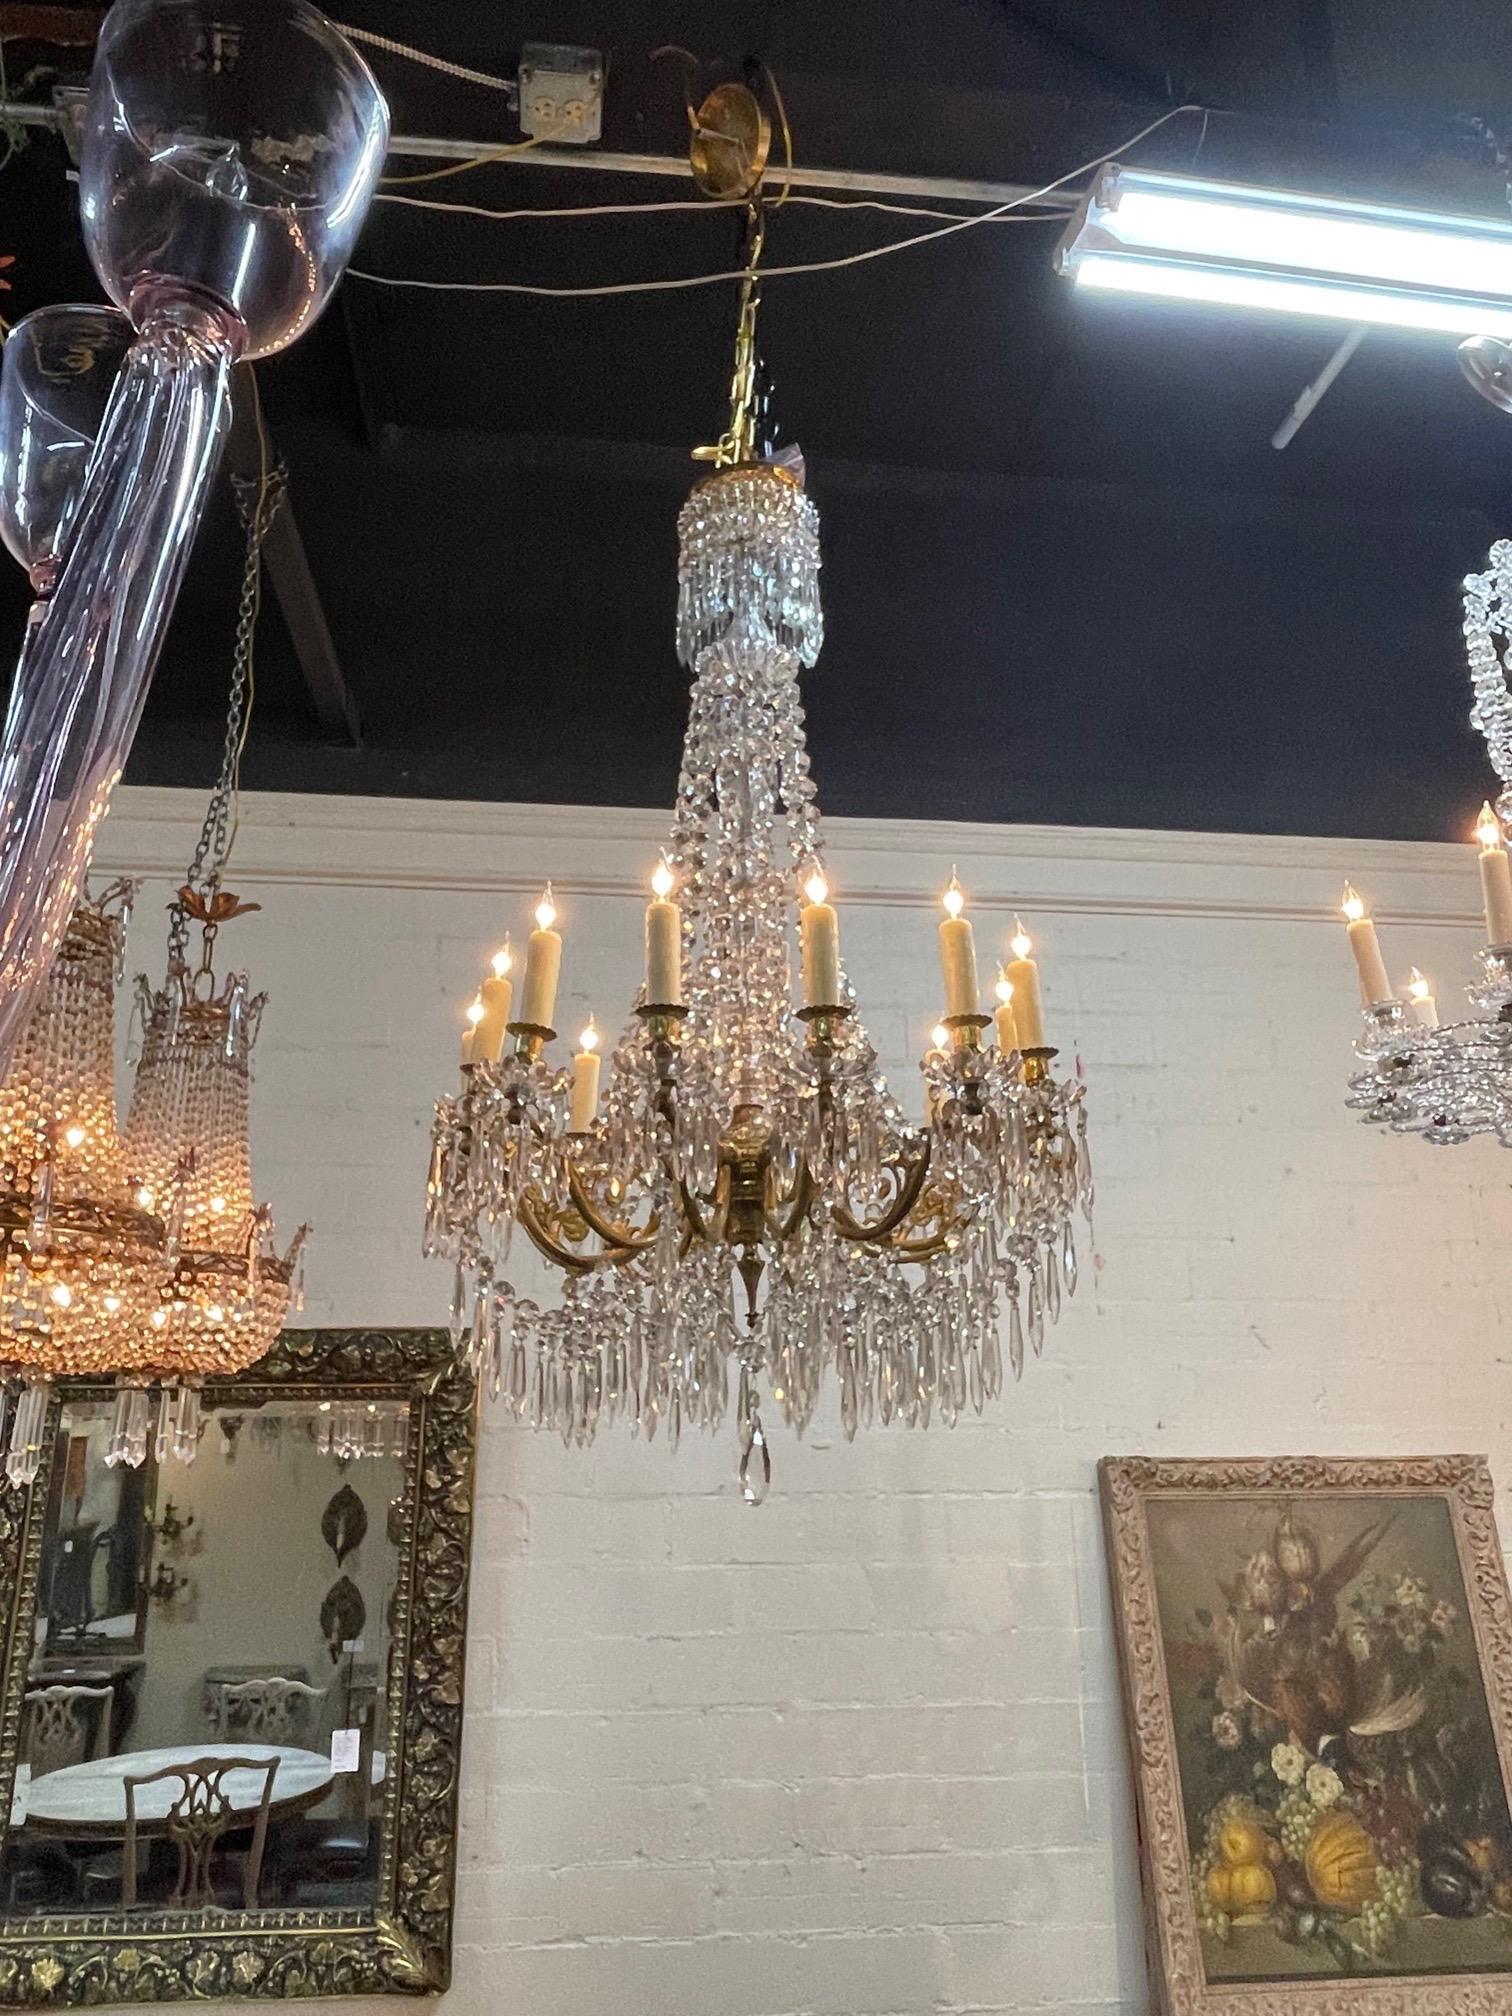 Exceptional 19th century French Baccarat crystal and gilt bronze 12 light chandelier. Beautiful scale and shape and covered in gorgeous crystals. Truly superb!!